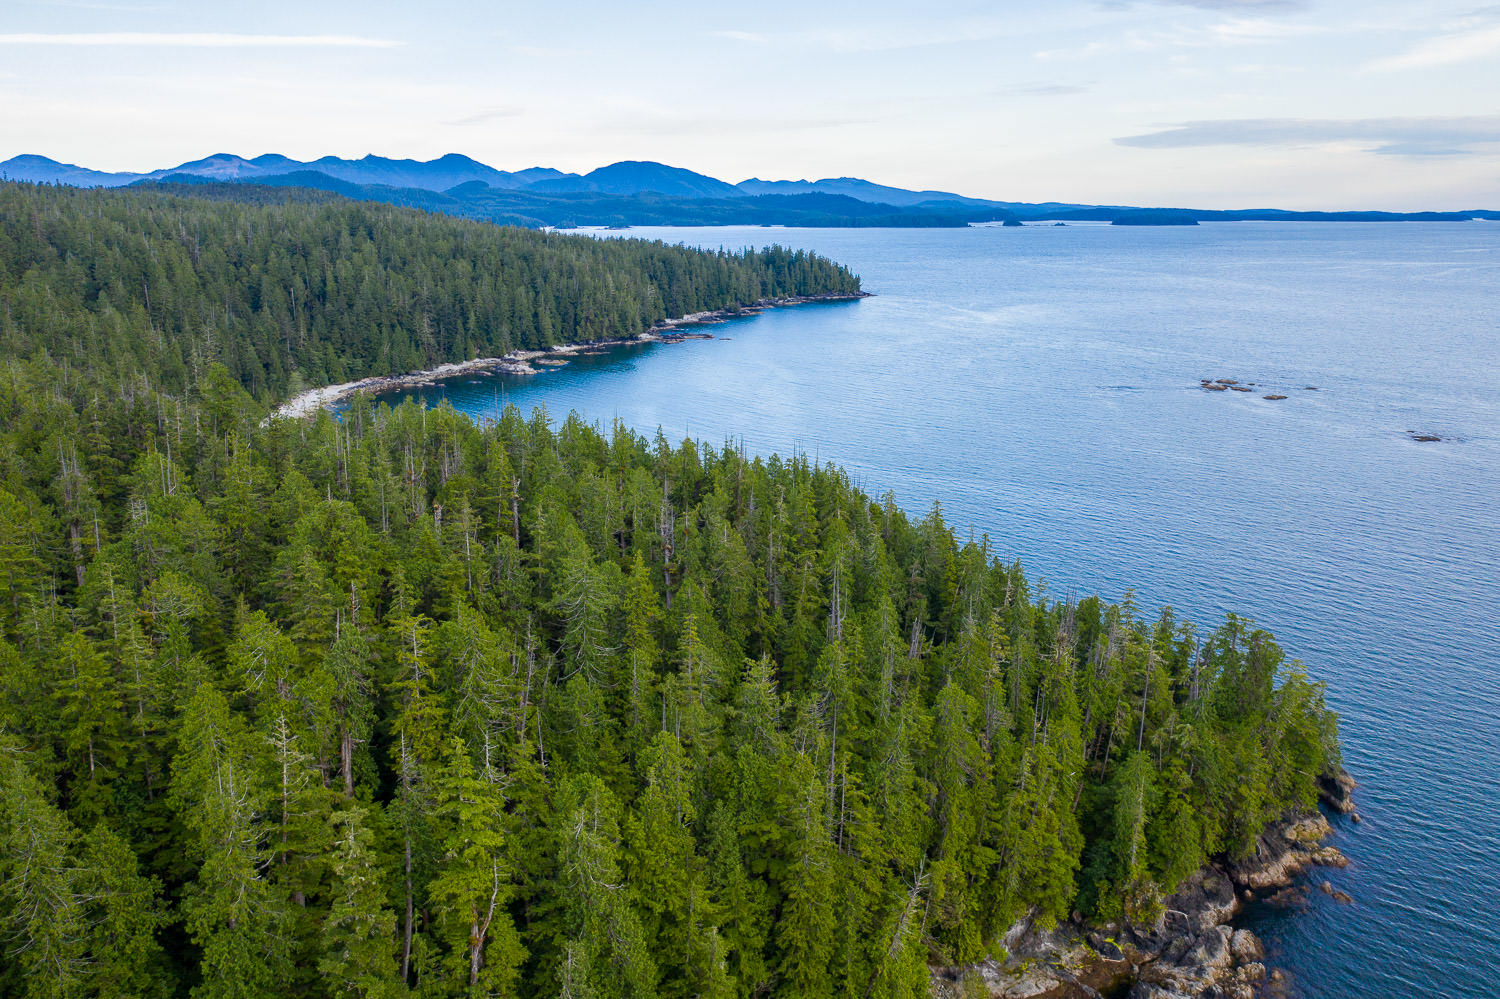 Overlooking the unprotected ancient forests of Vernon Bay in Barkley Sound in Uchucklesaht and Tseshaht nation territories. 33 logging cutblocks have been approved in this region, some overlapping with the newly recommended deferral areas.